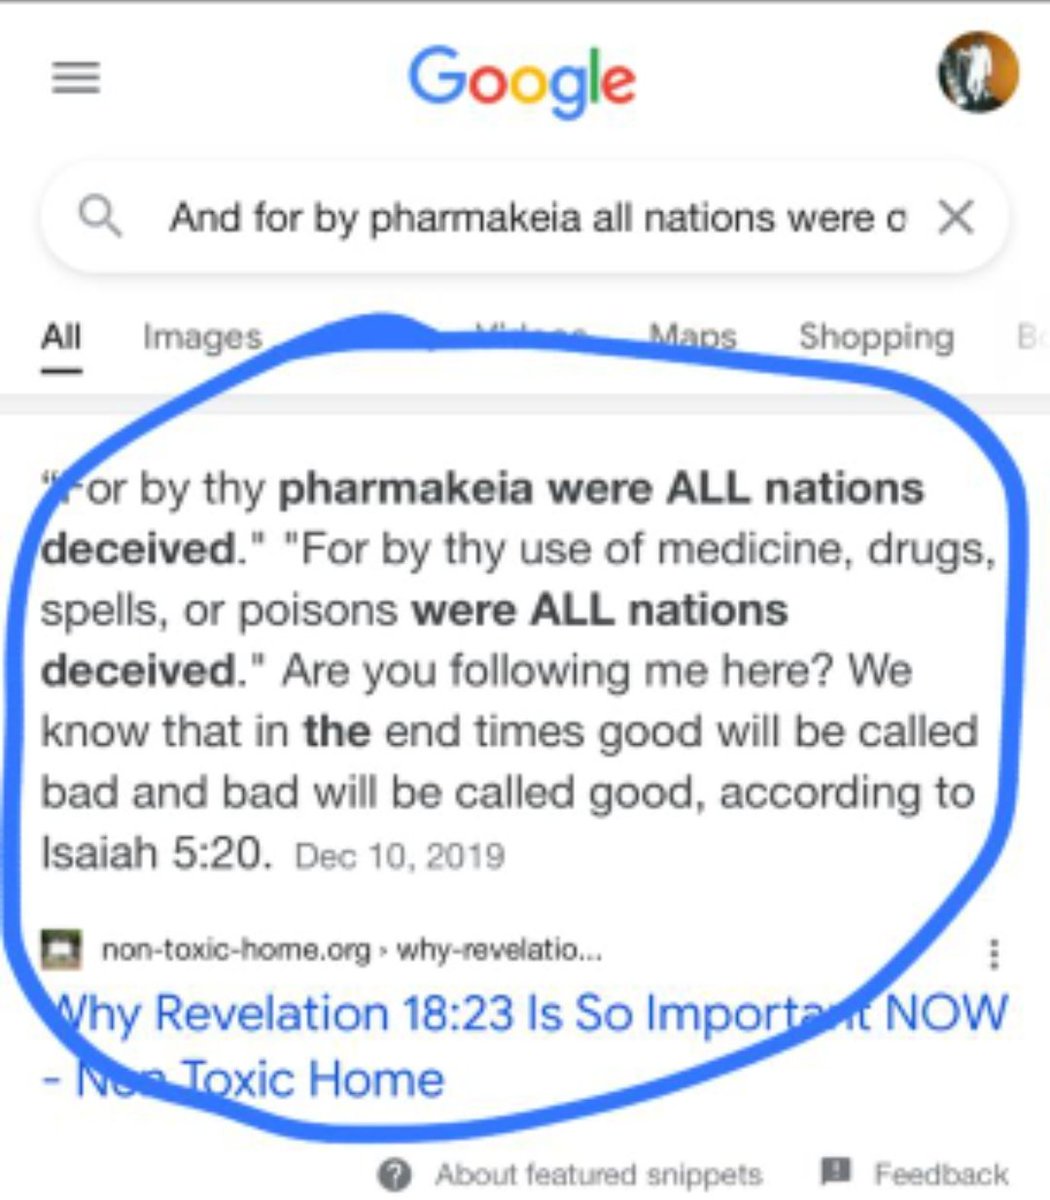 There was a conspiracy to betray Jesus. There was a conspiracy to sell Joseph. There was a conspiracy against Daniel. Same Bible said there will be a conspiracy against humanity with Pharmakeia - Rev 18:23